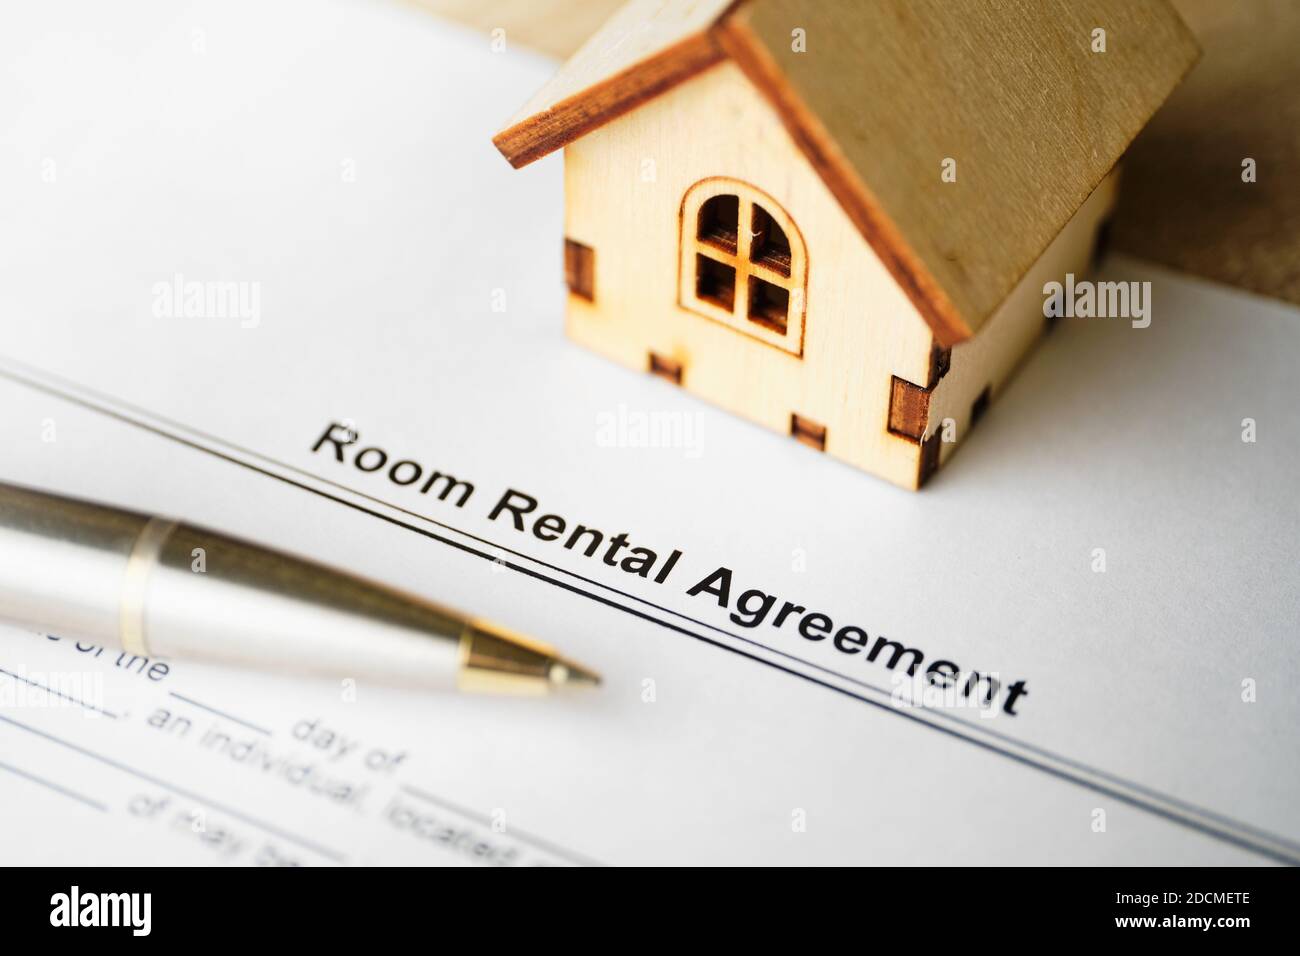 The document Room Rental Agreement is ready for signing. Stock Photo